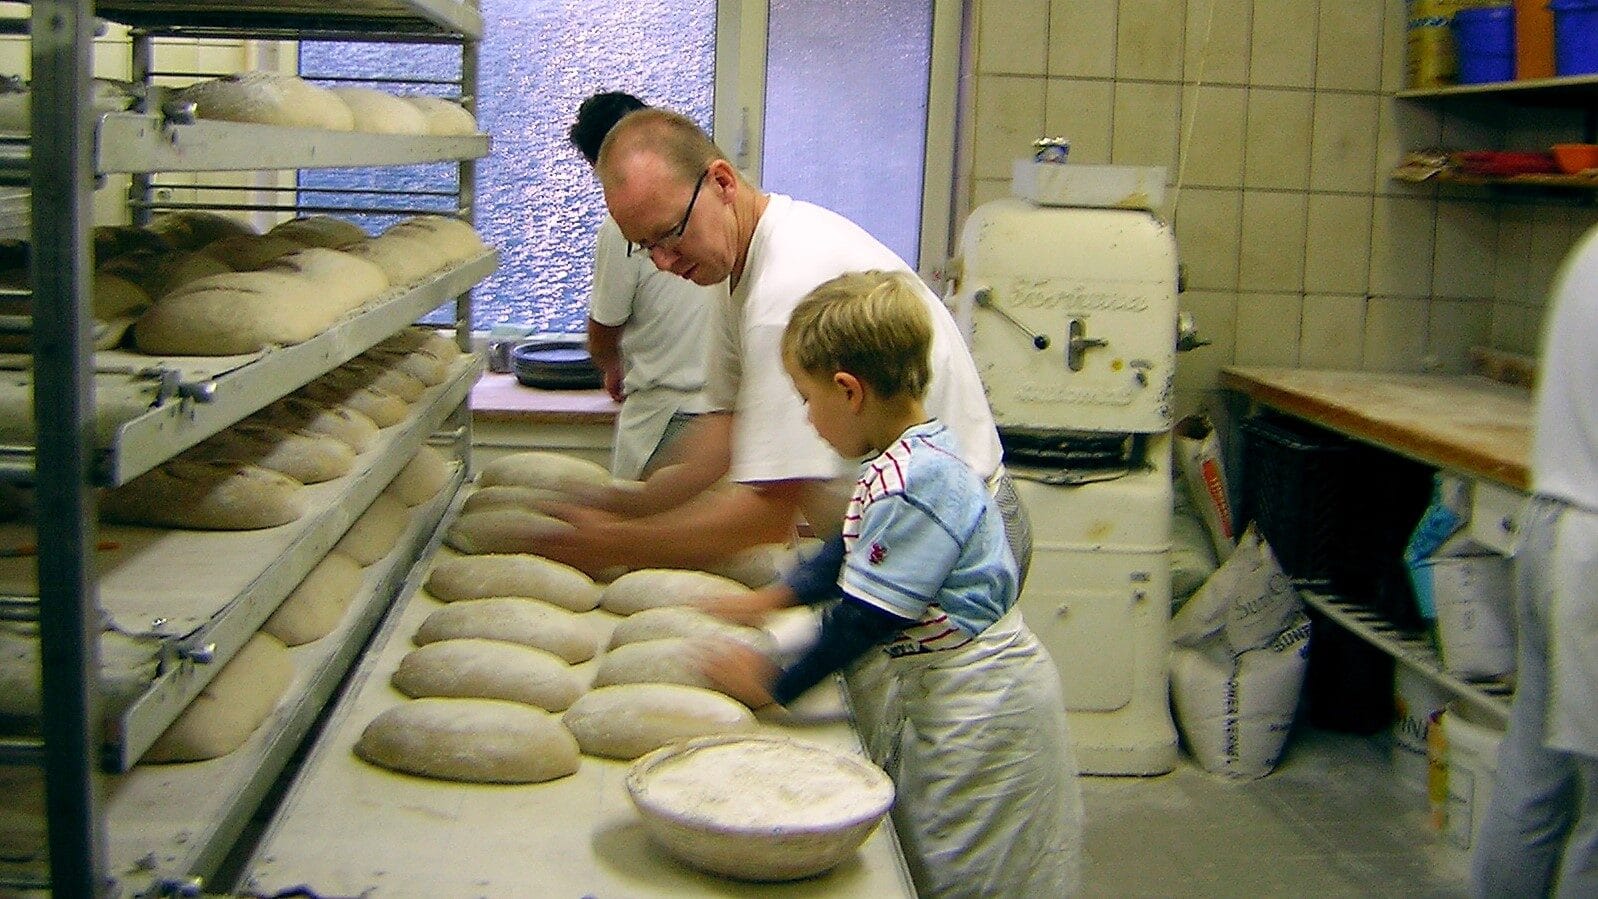 Image: man teaches a child to bake bread